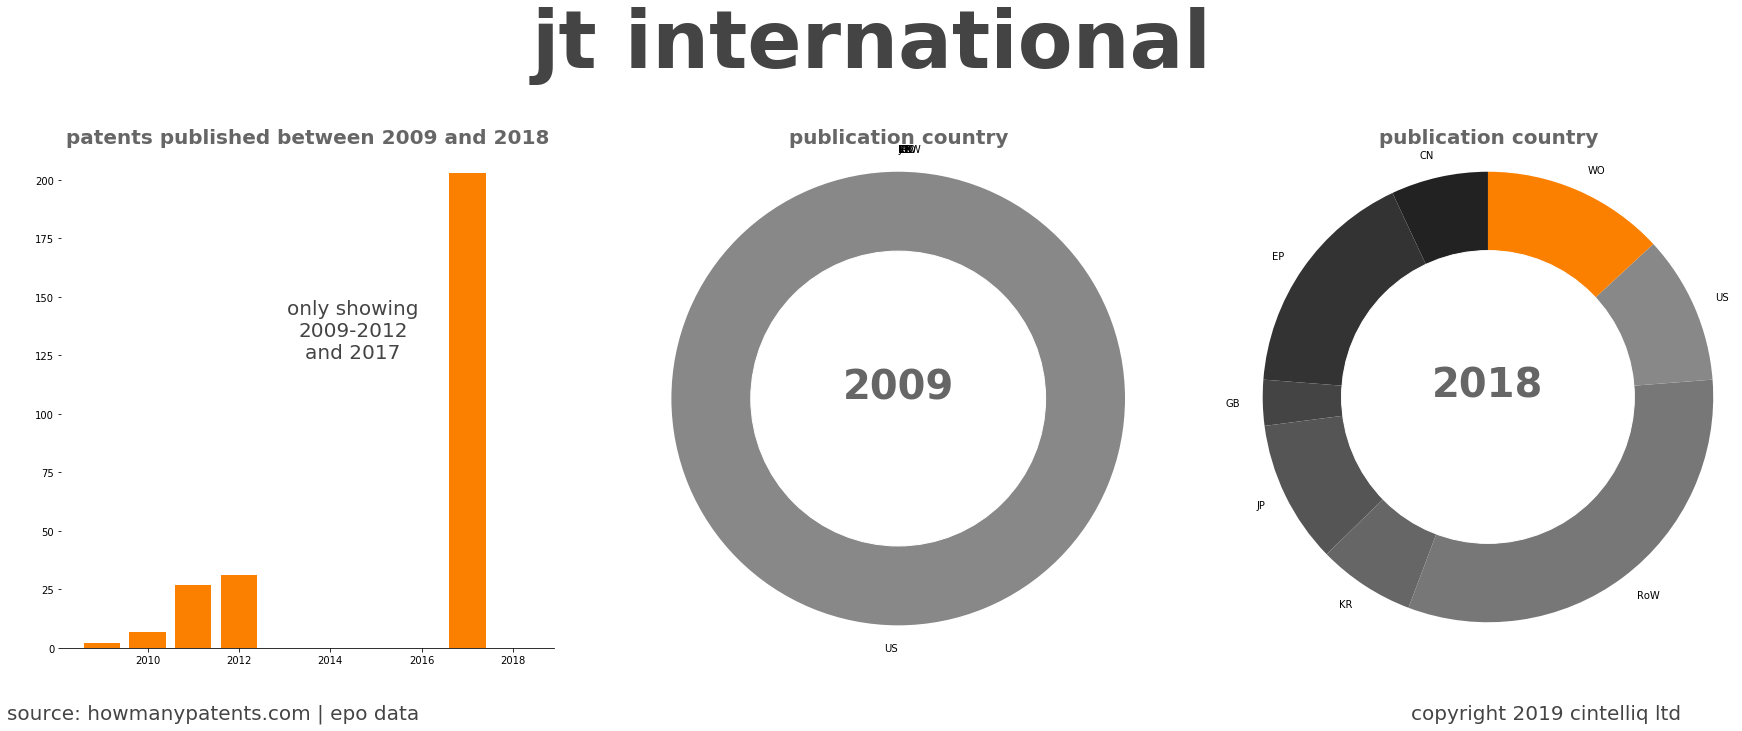 summary of patents for Jt International